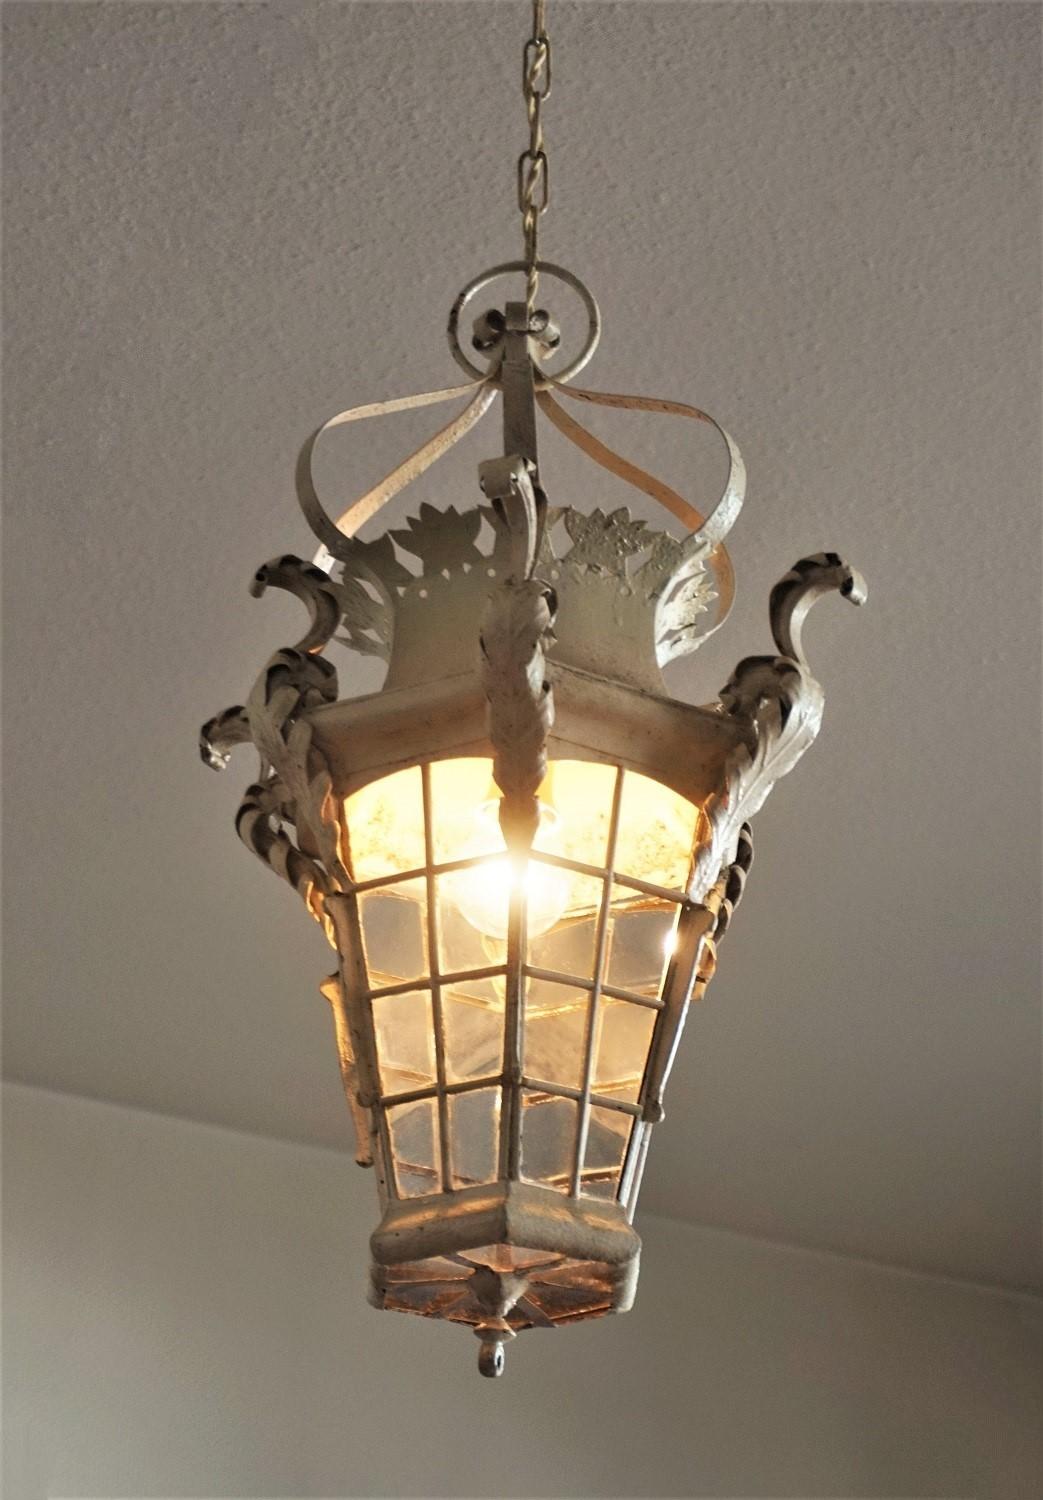 19th Century Antique French Handcrafted Wrought Iron Glass Street Lantern For Sale